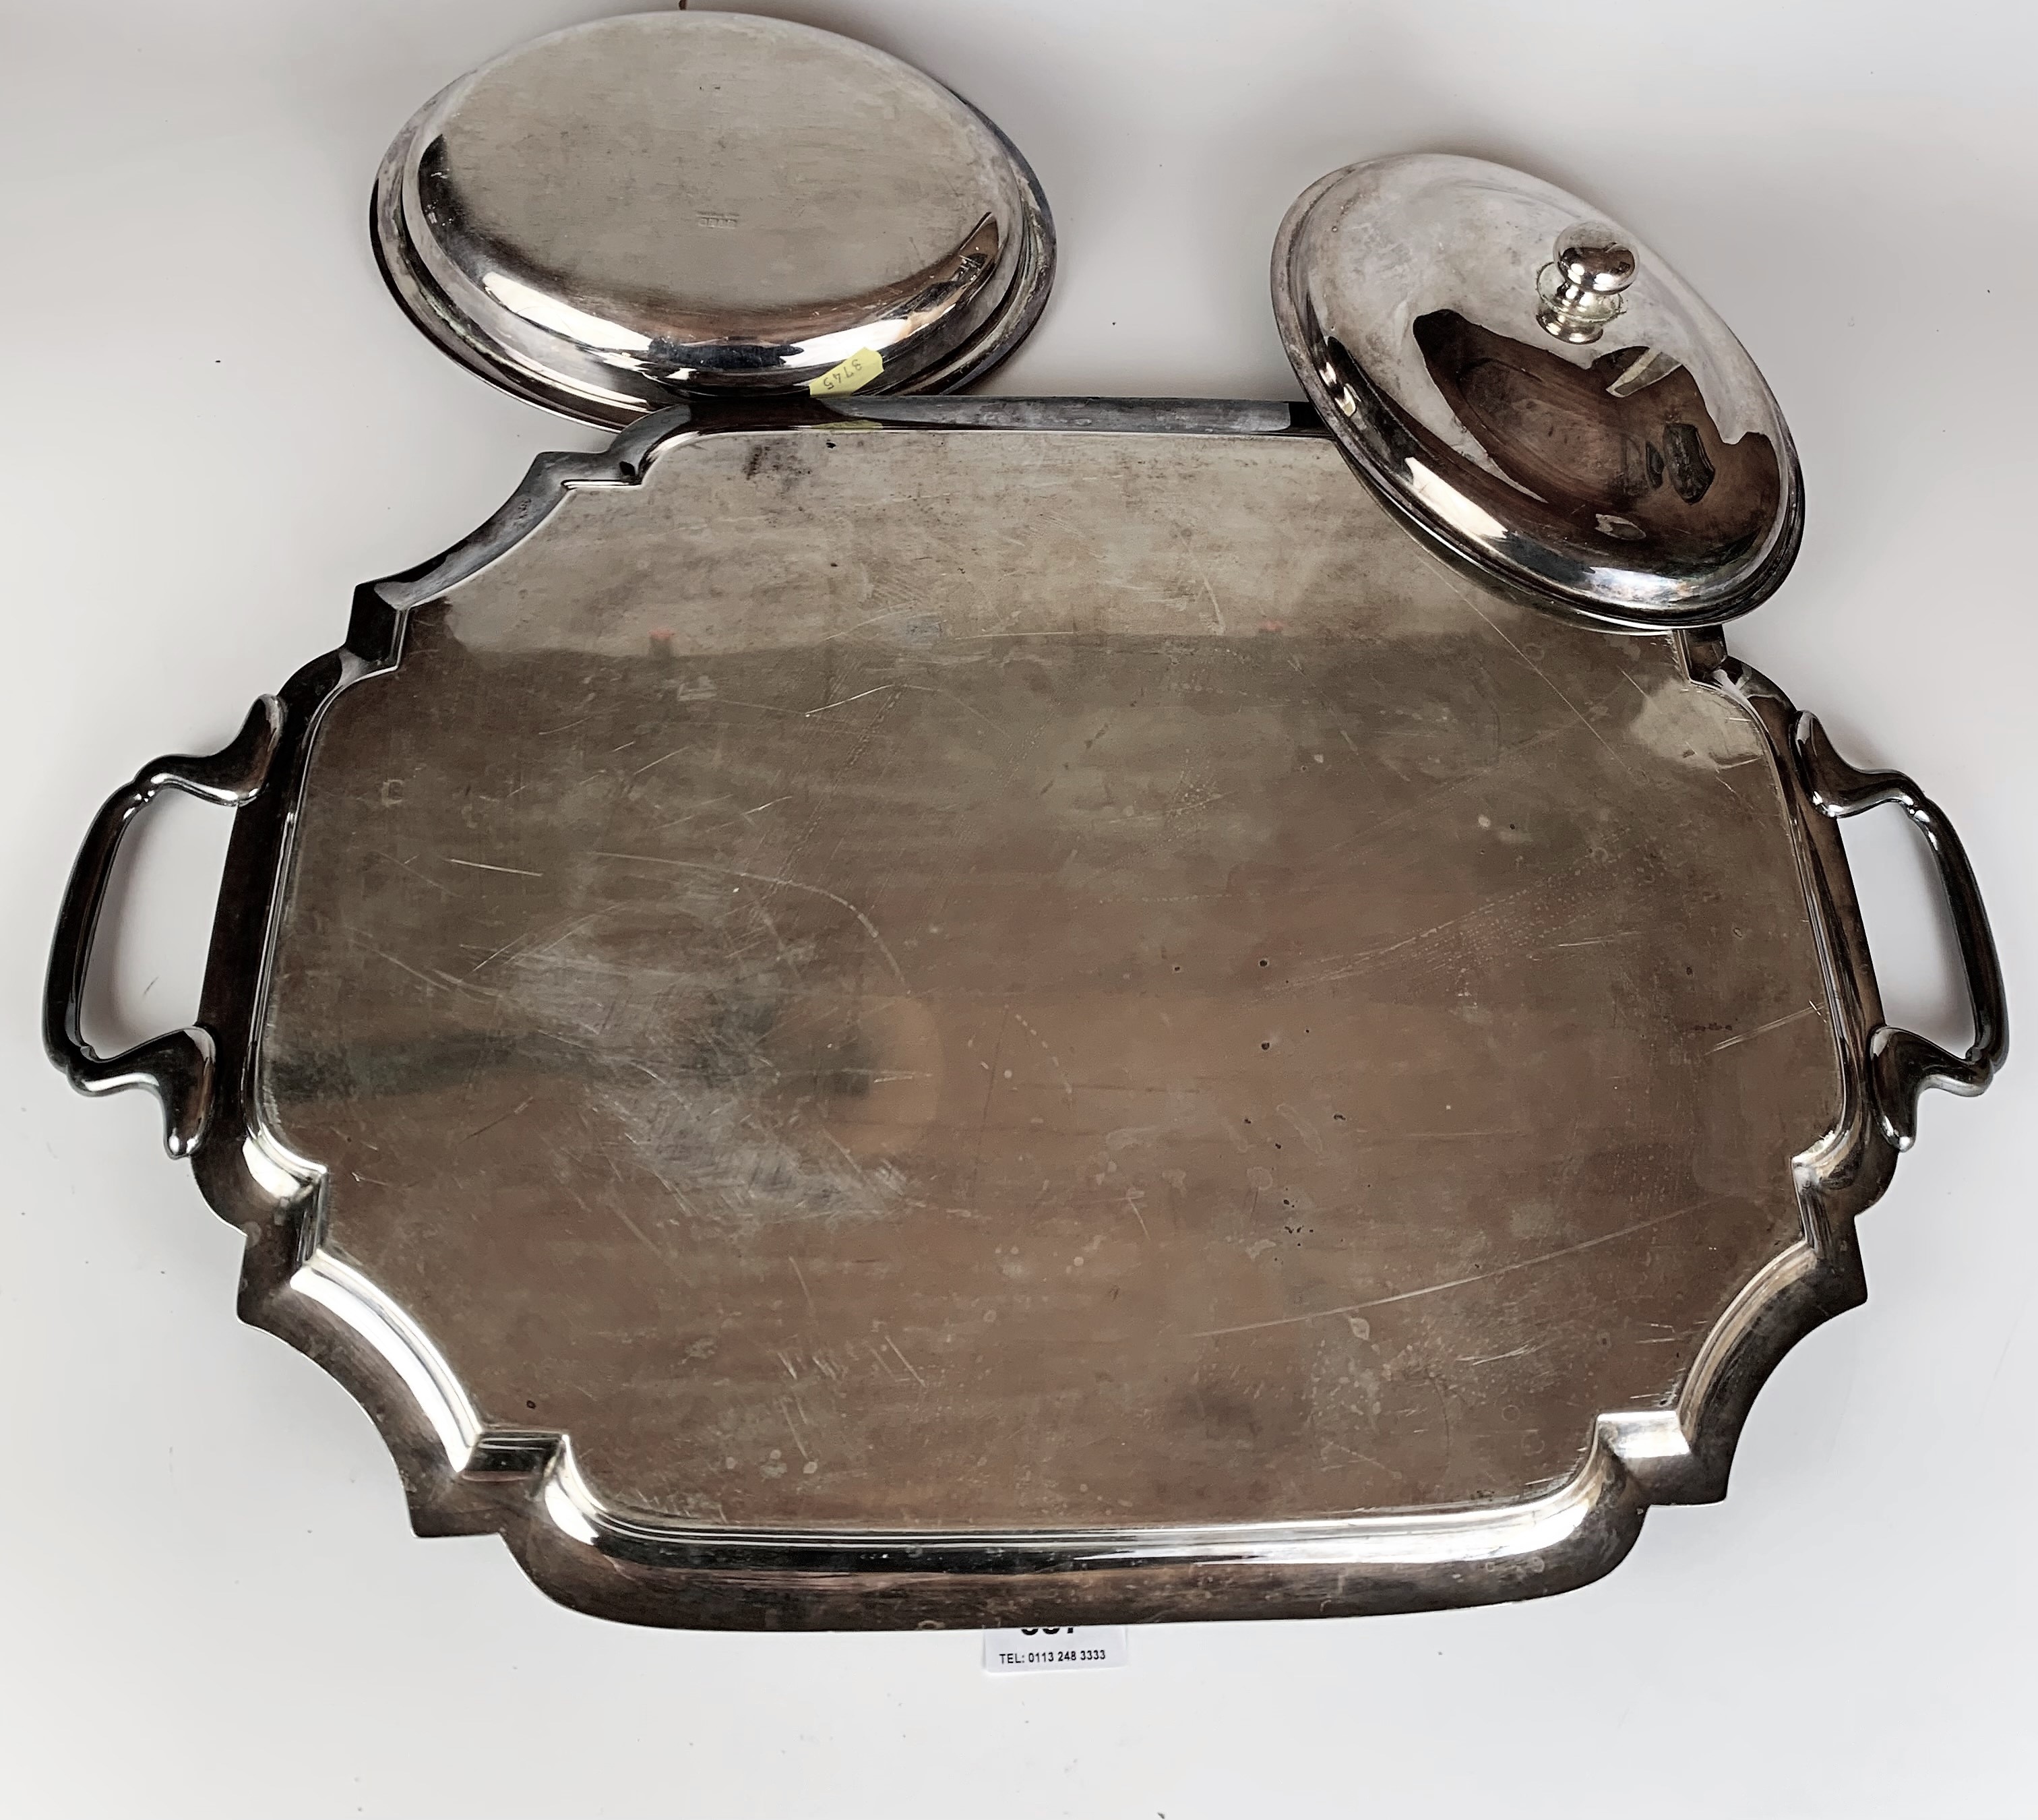 Plated gallery tray 21.5” long x 14” wide and plated lidded tureen 9.5” x 7.5” - Image 2 of 2